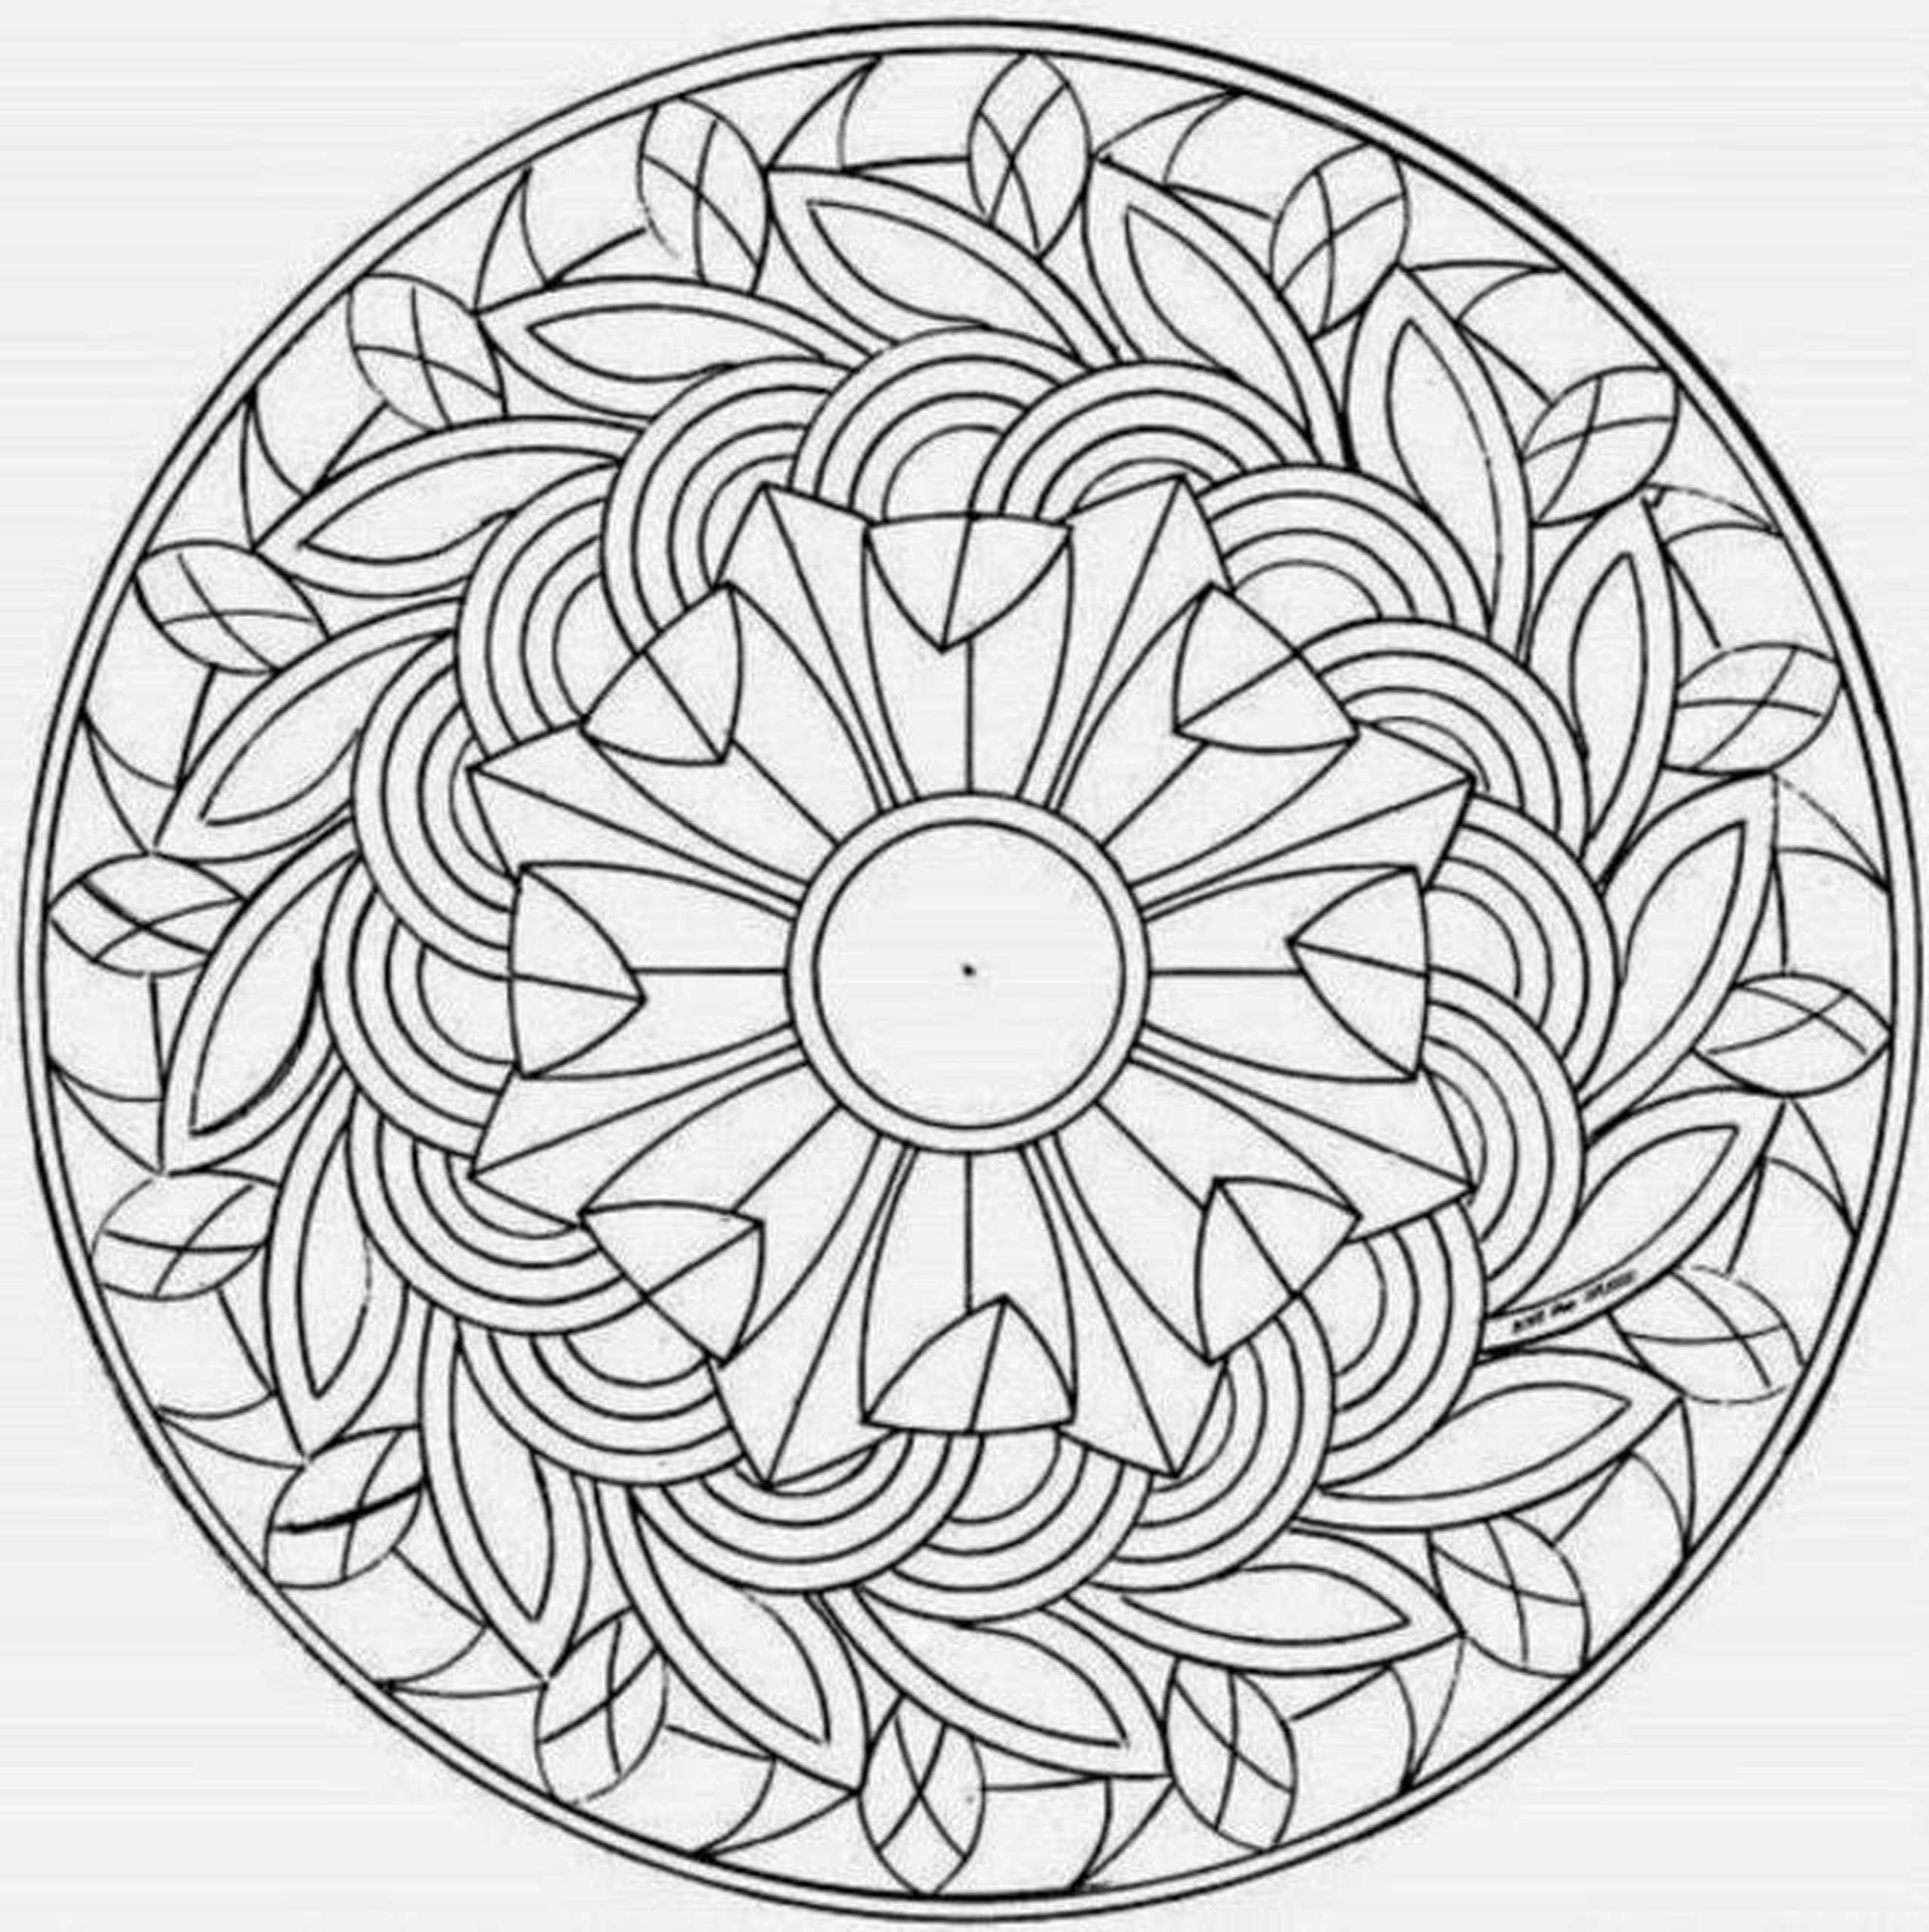 Print & Download - Coloring Pages for Girls, Recommend a ...